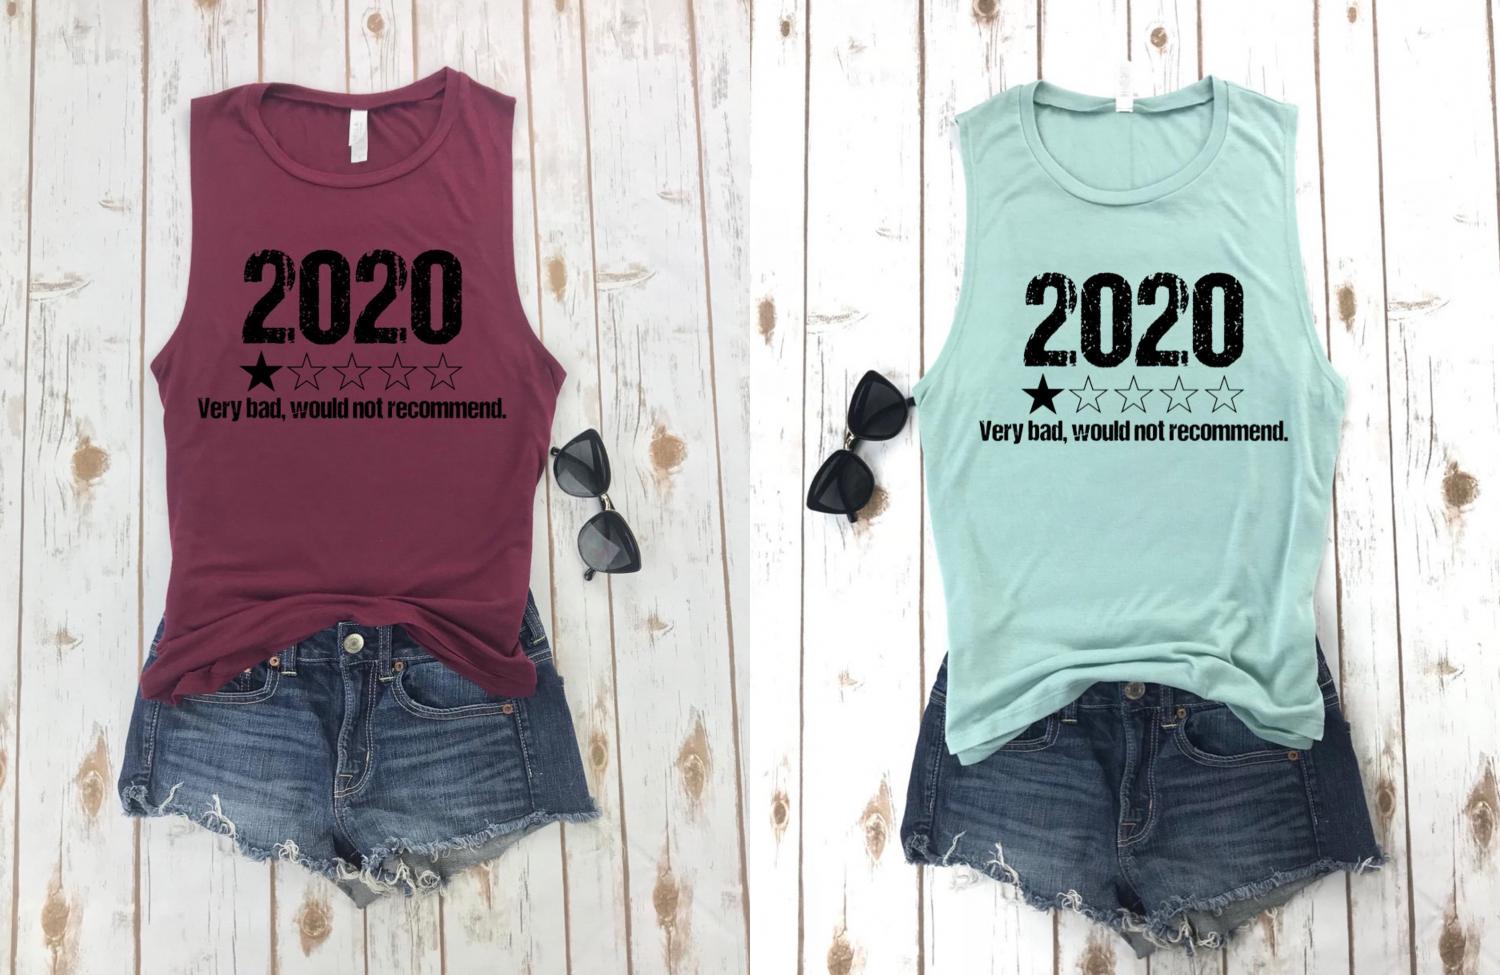 2020 Very Bad, Would Not Recommend T-Shirt